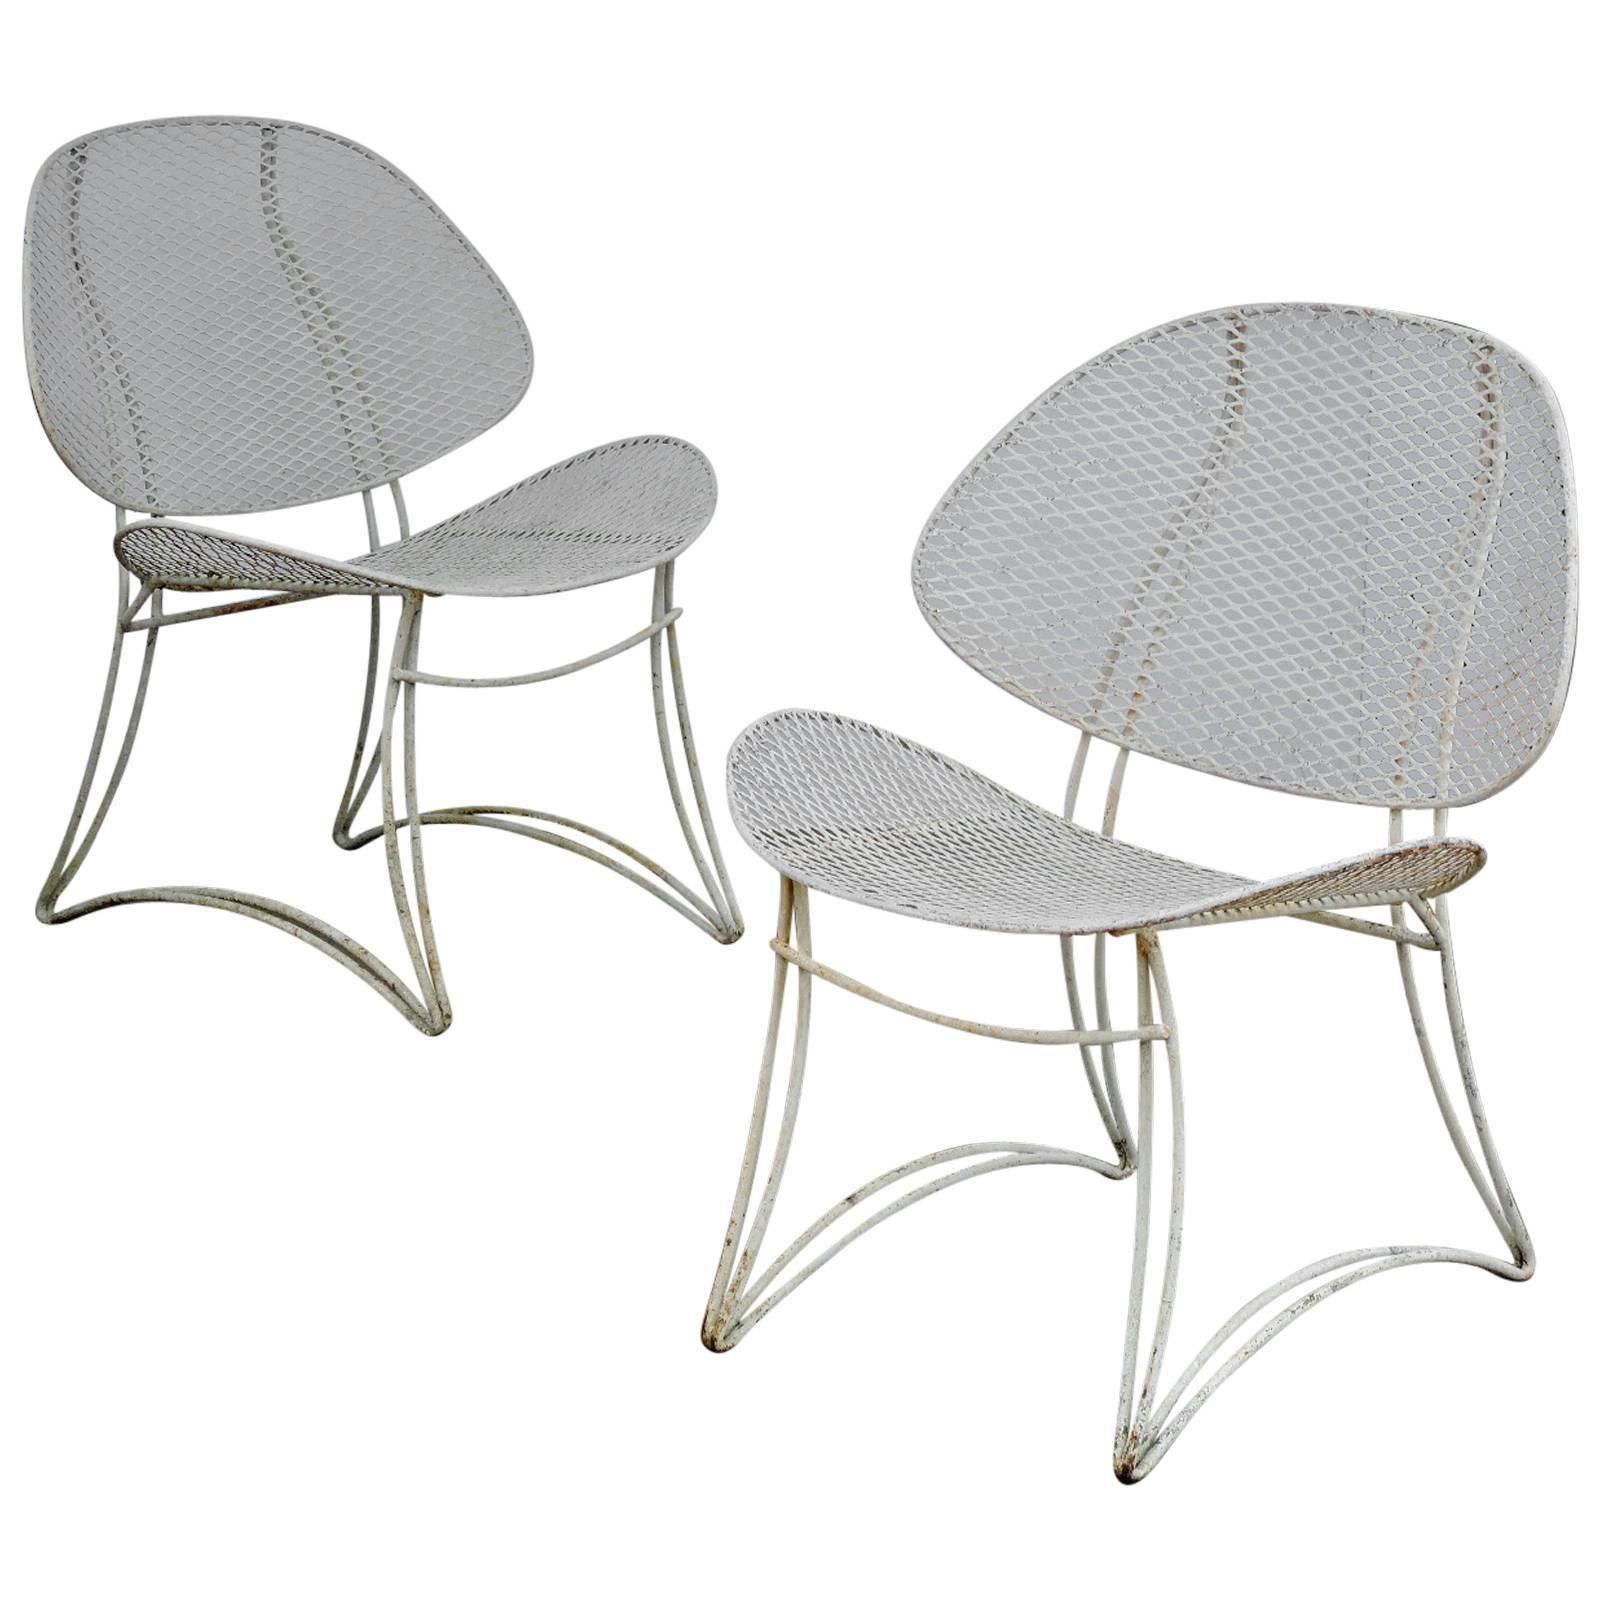 Modernist Wrought Iron Clam Shell Chairs